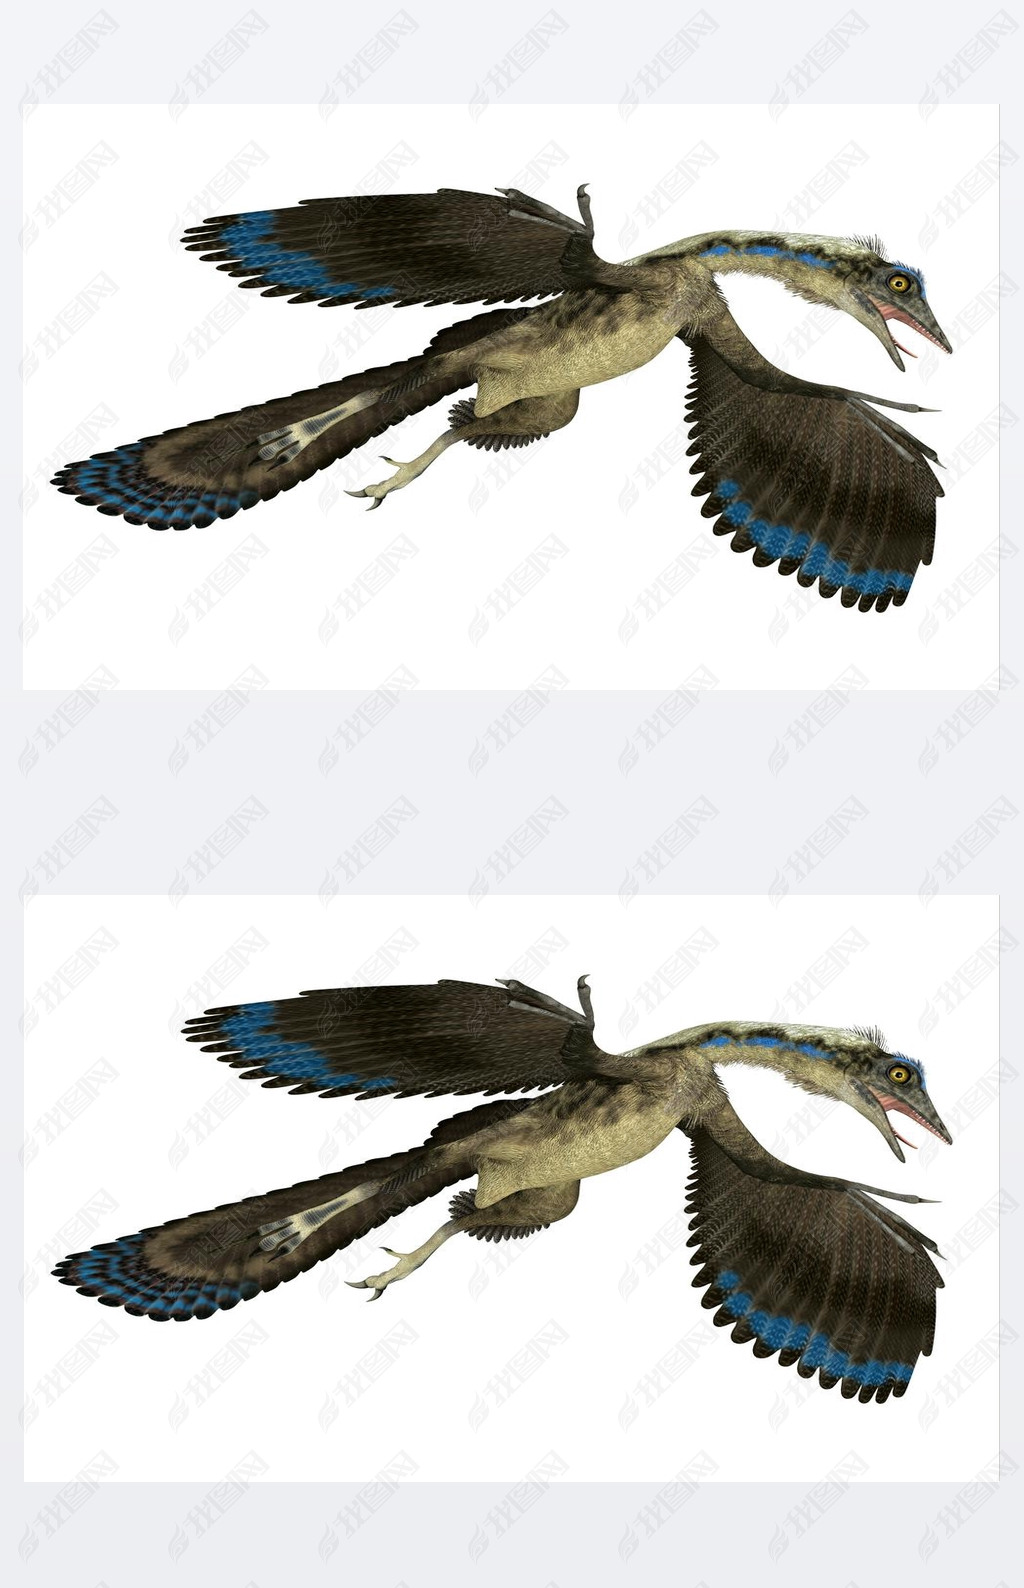 Archaeopteryx was a carnivorous Pterosaur reptile that lived in Germany during the Jurassic Period.